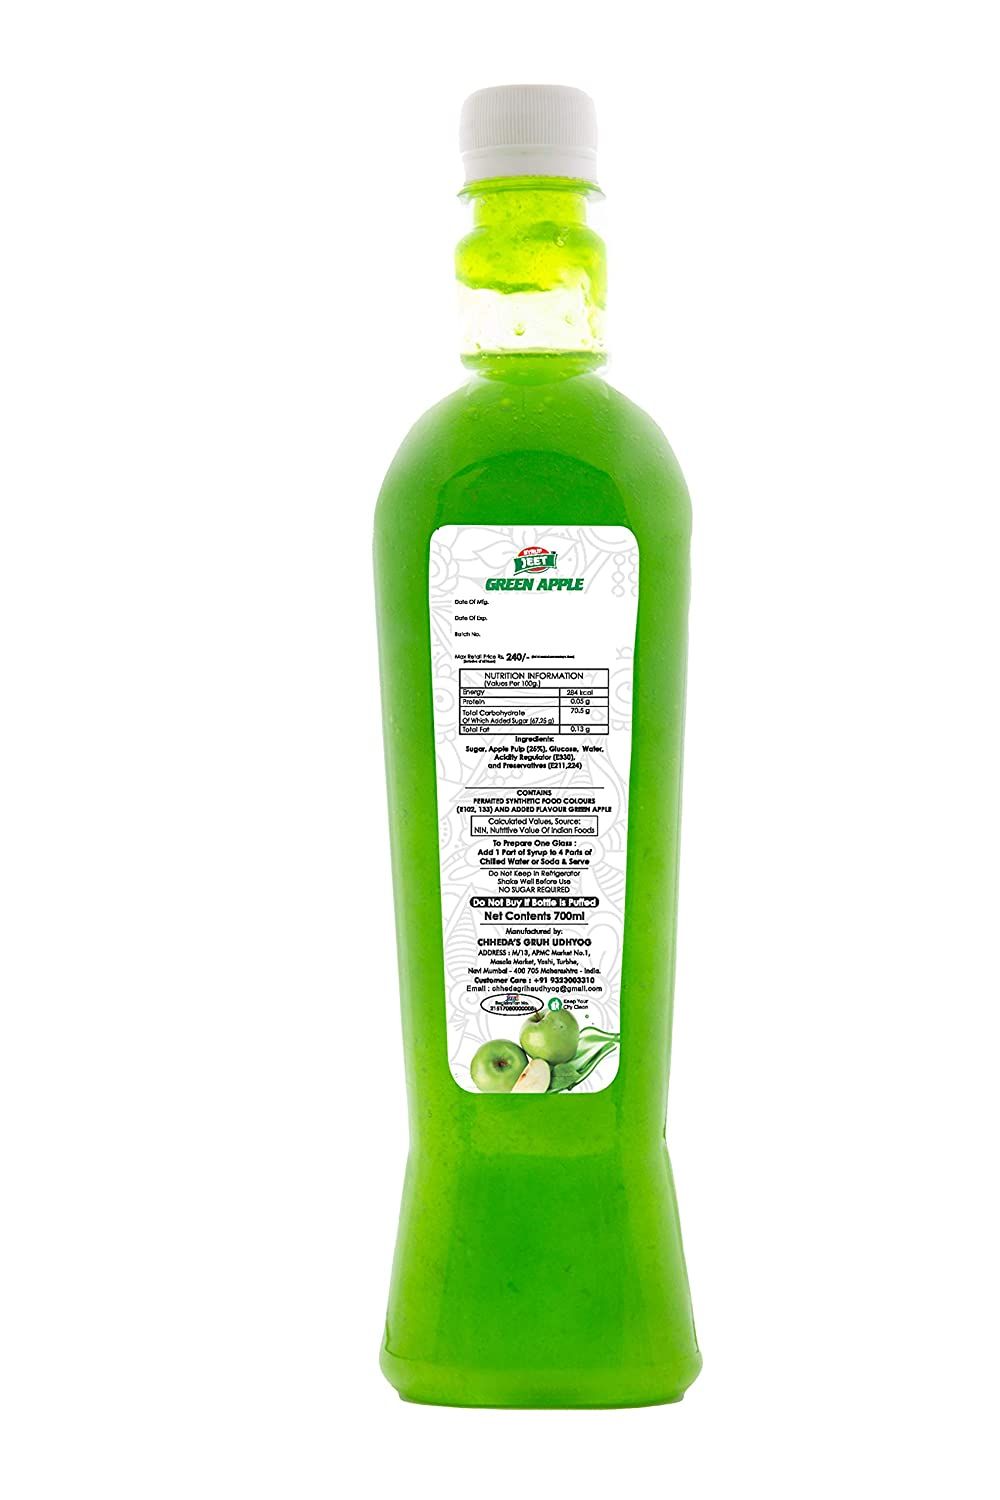 JEET Green Apple Syrup Image